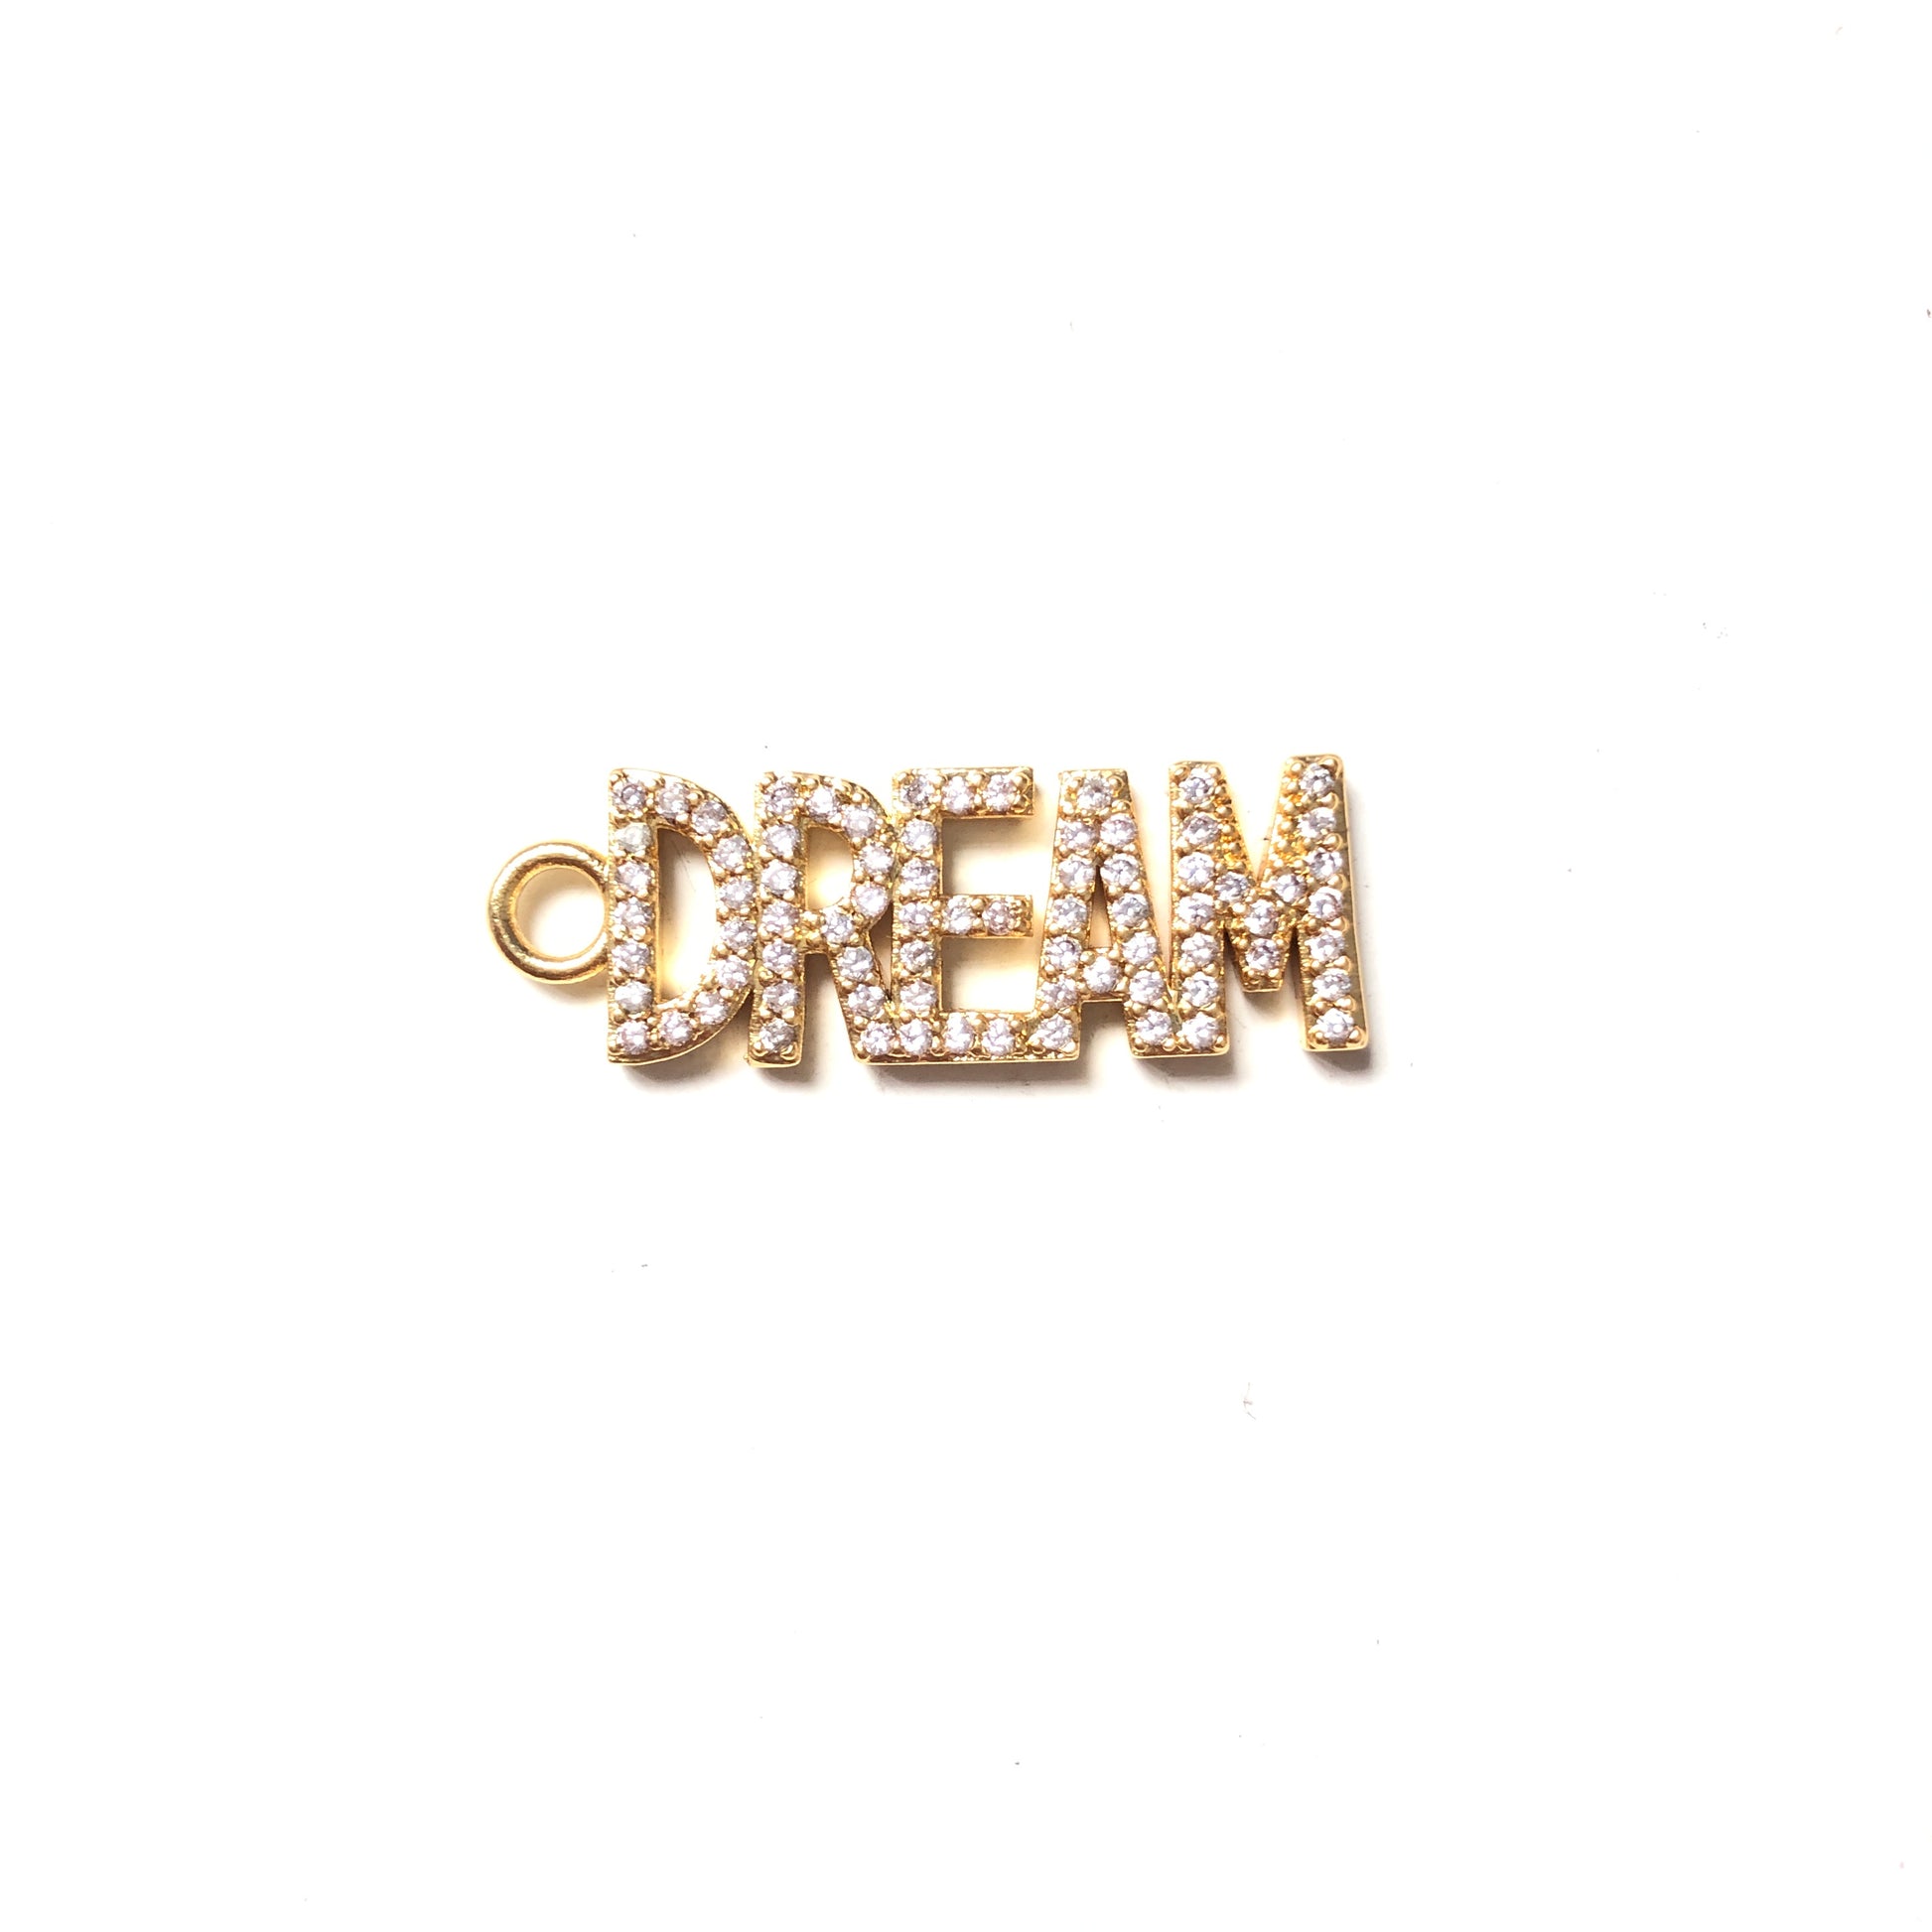 10pcs/lot Gold CZ Paved Letter Charms DREAM-10pcs CZ Paved Charms Love Letters Mother's Day Words & Quotes Charms Beads Beyond